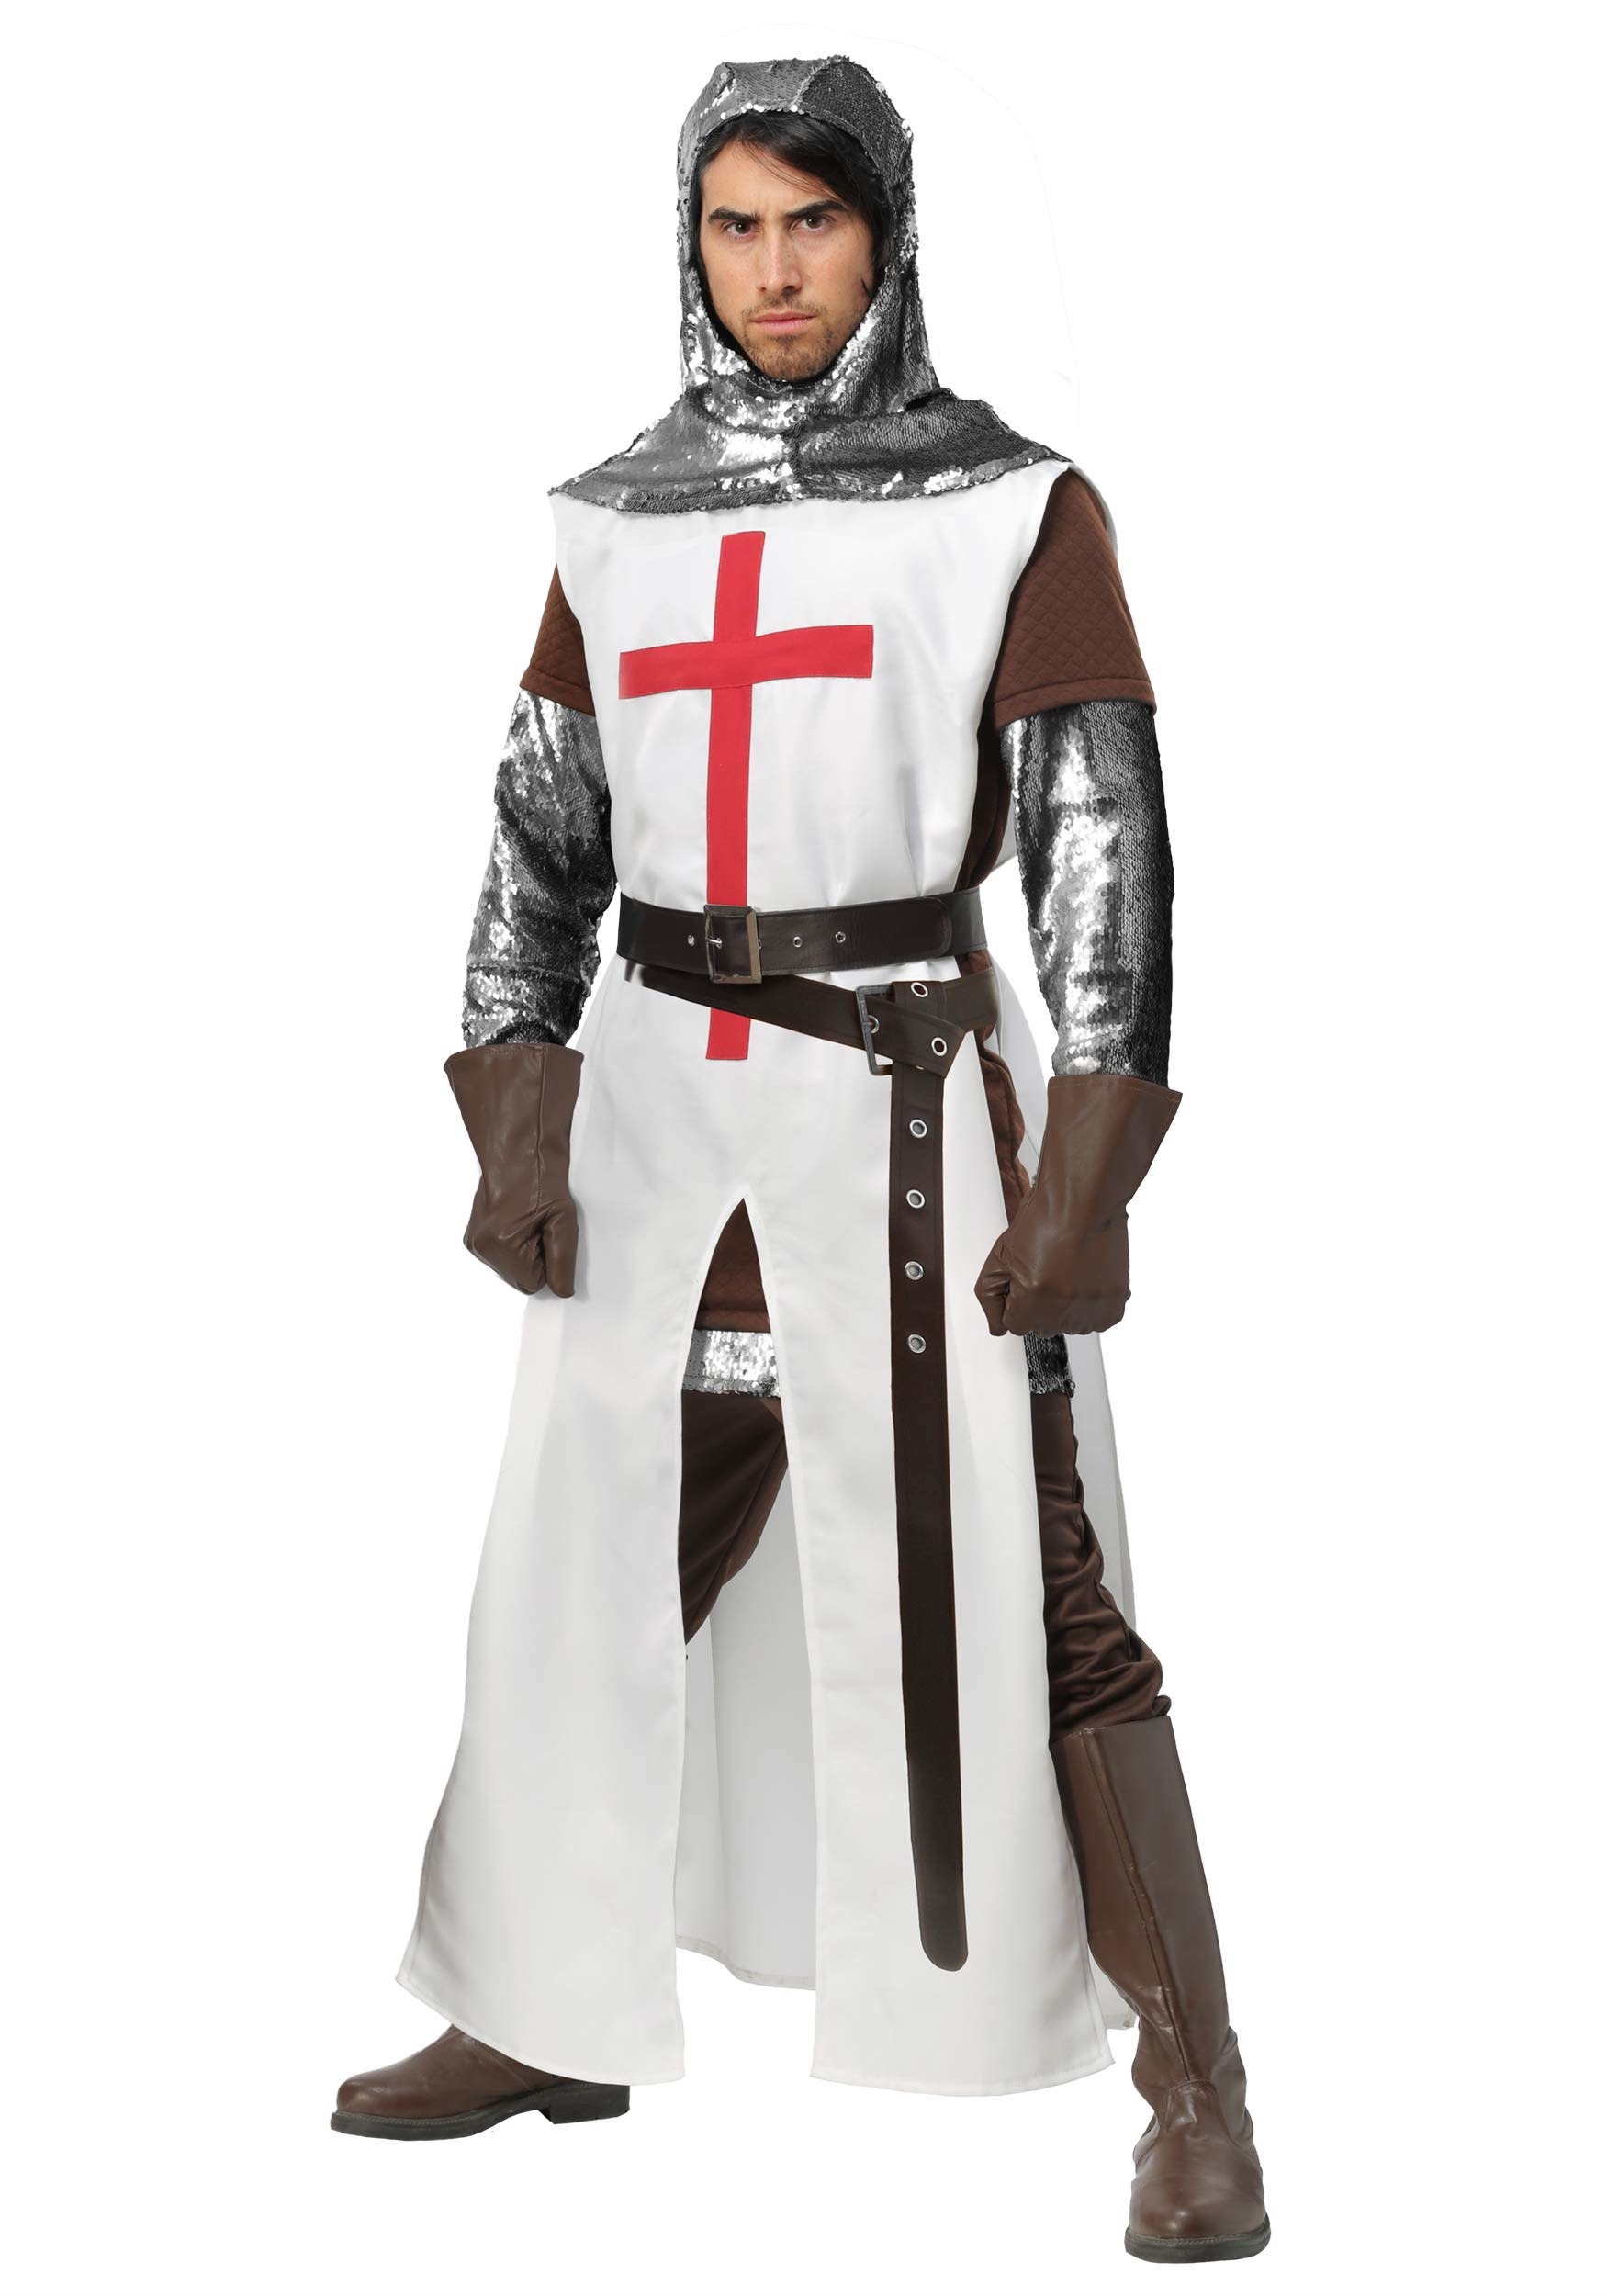 Photos - Fancy Dress Crusader FUN Costumes   Costume for Men Brown/Gray/White 